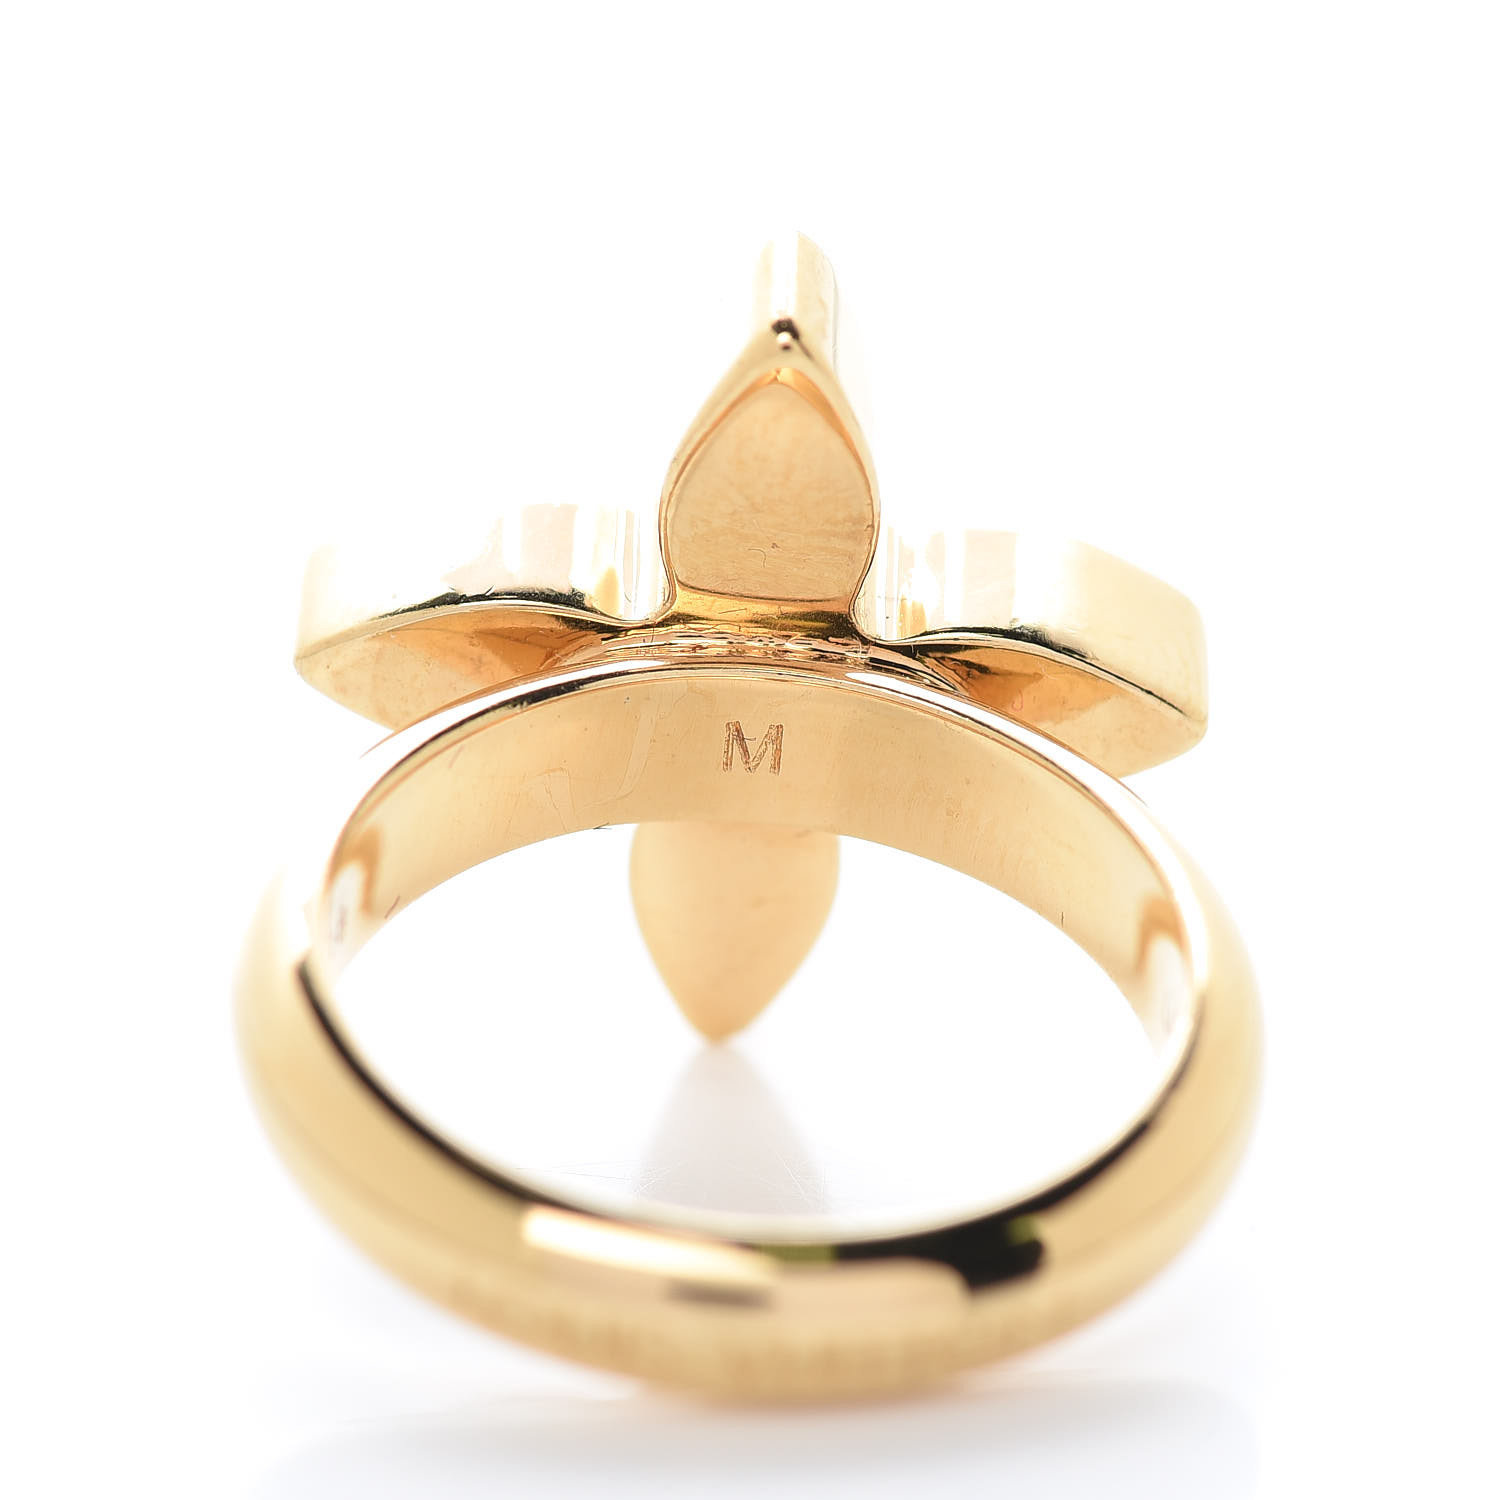 LOUIS VUITTON Love Letters Timeless Ring Set M 407948